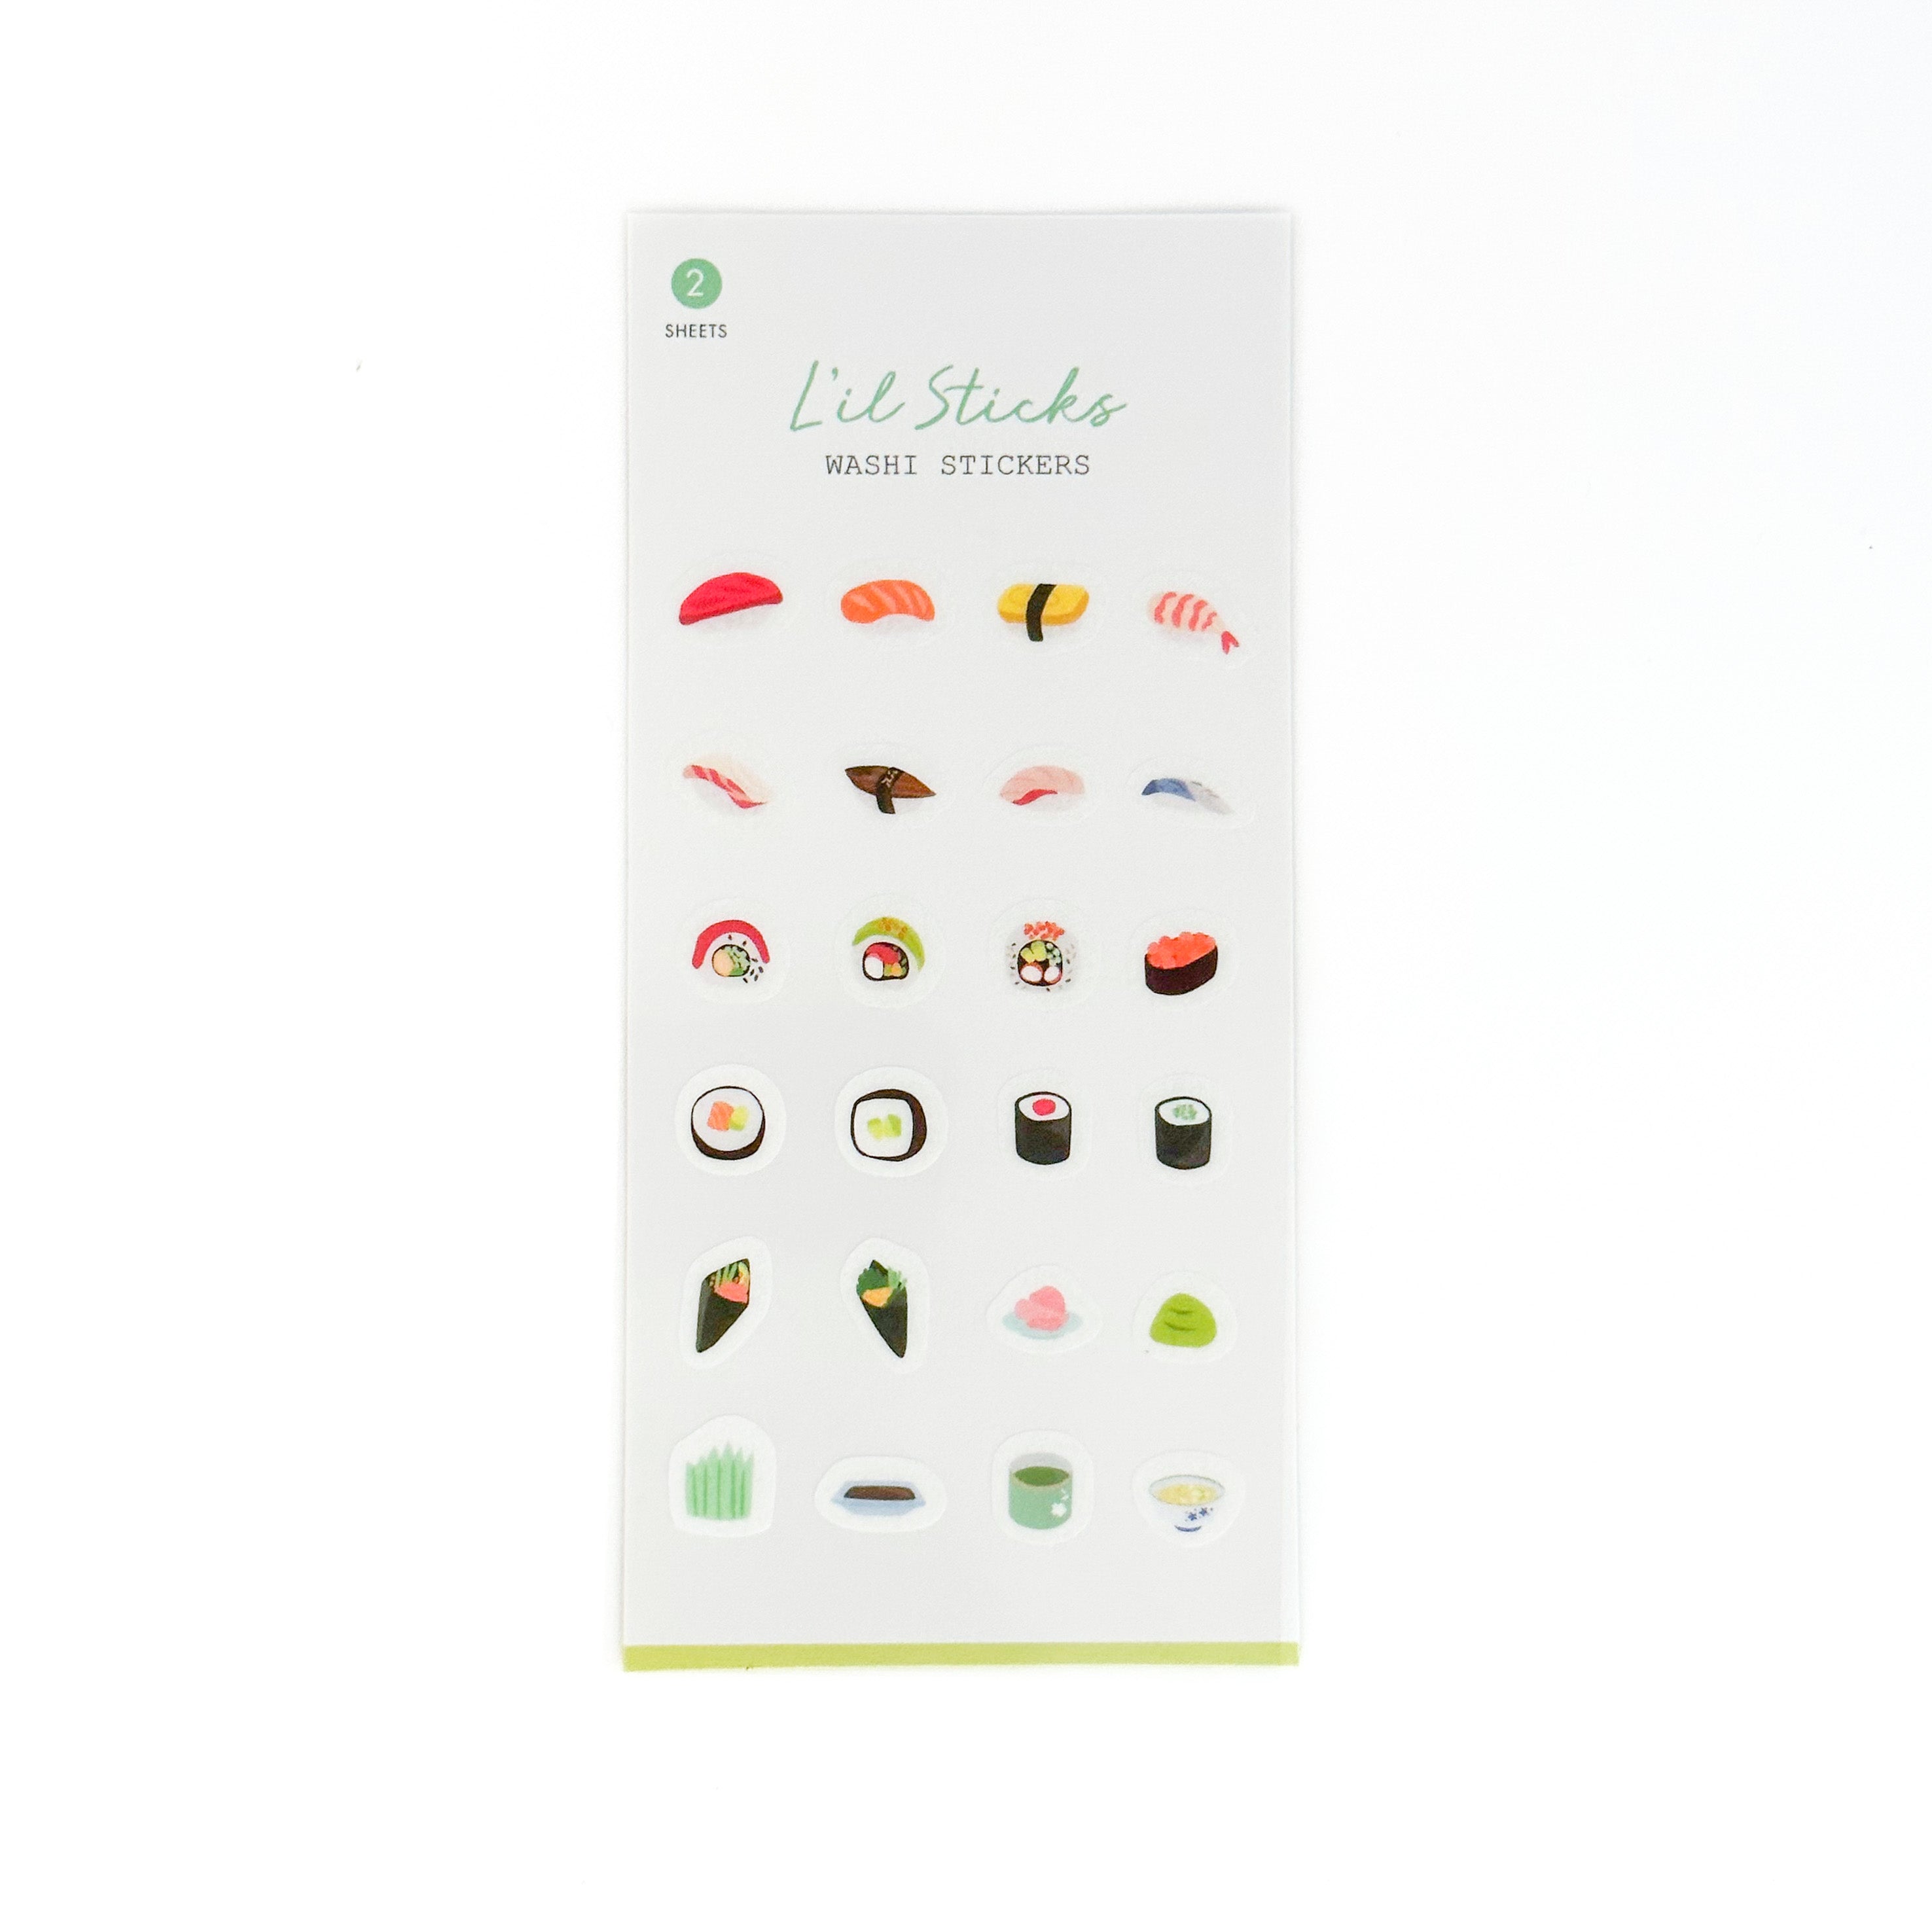 These Sushi stickers are carefully crafted with intricate details, offering a charming assortment of designs that are ideal for planning, marking important events, or adding decorative touches to your pages. These are from Girl of all Work and sold at BBB Supplies Craft Shop.